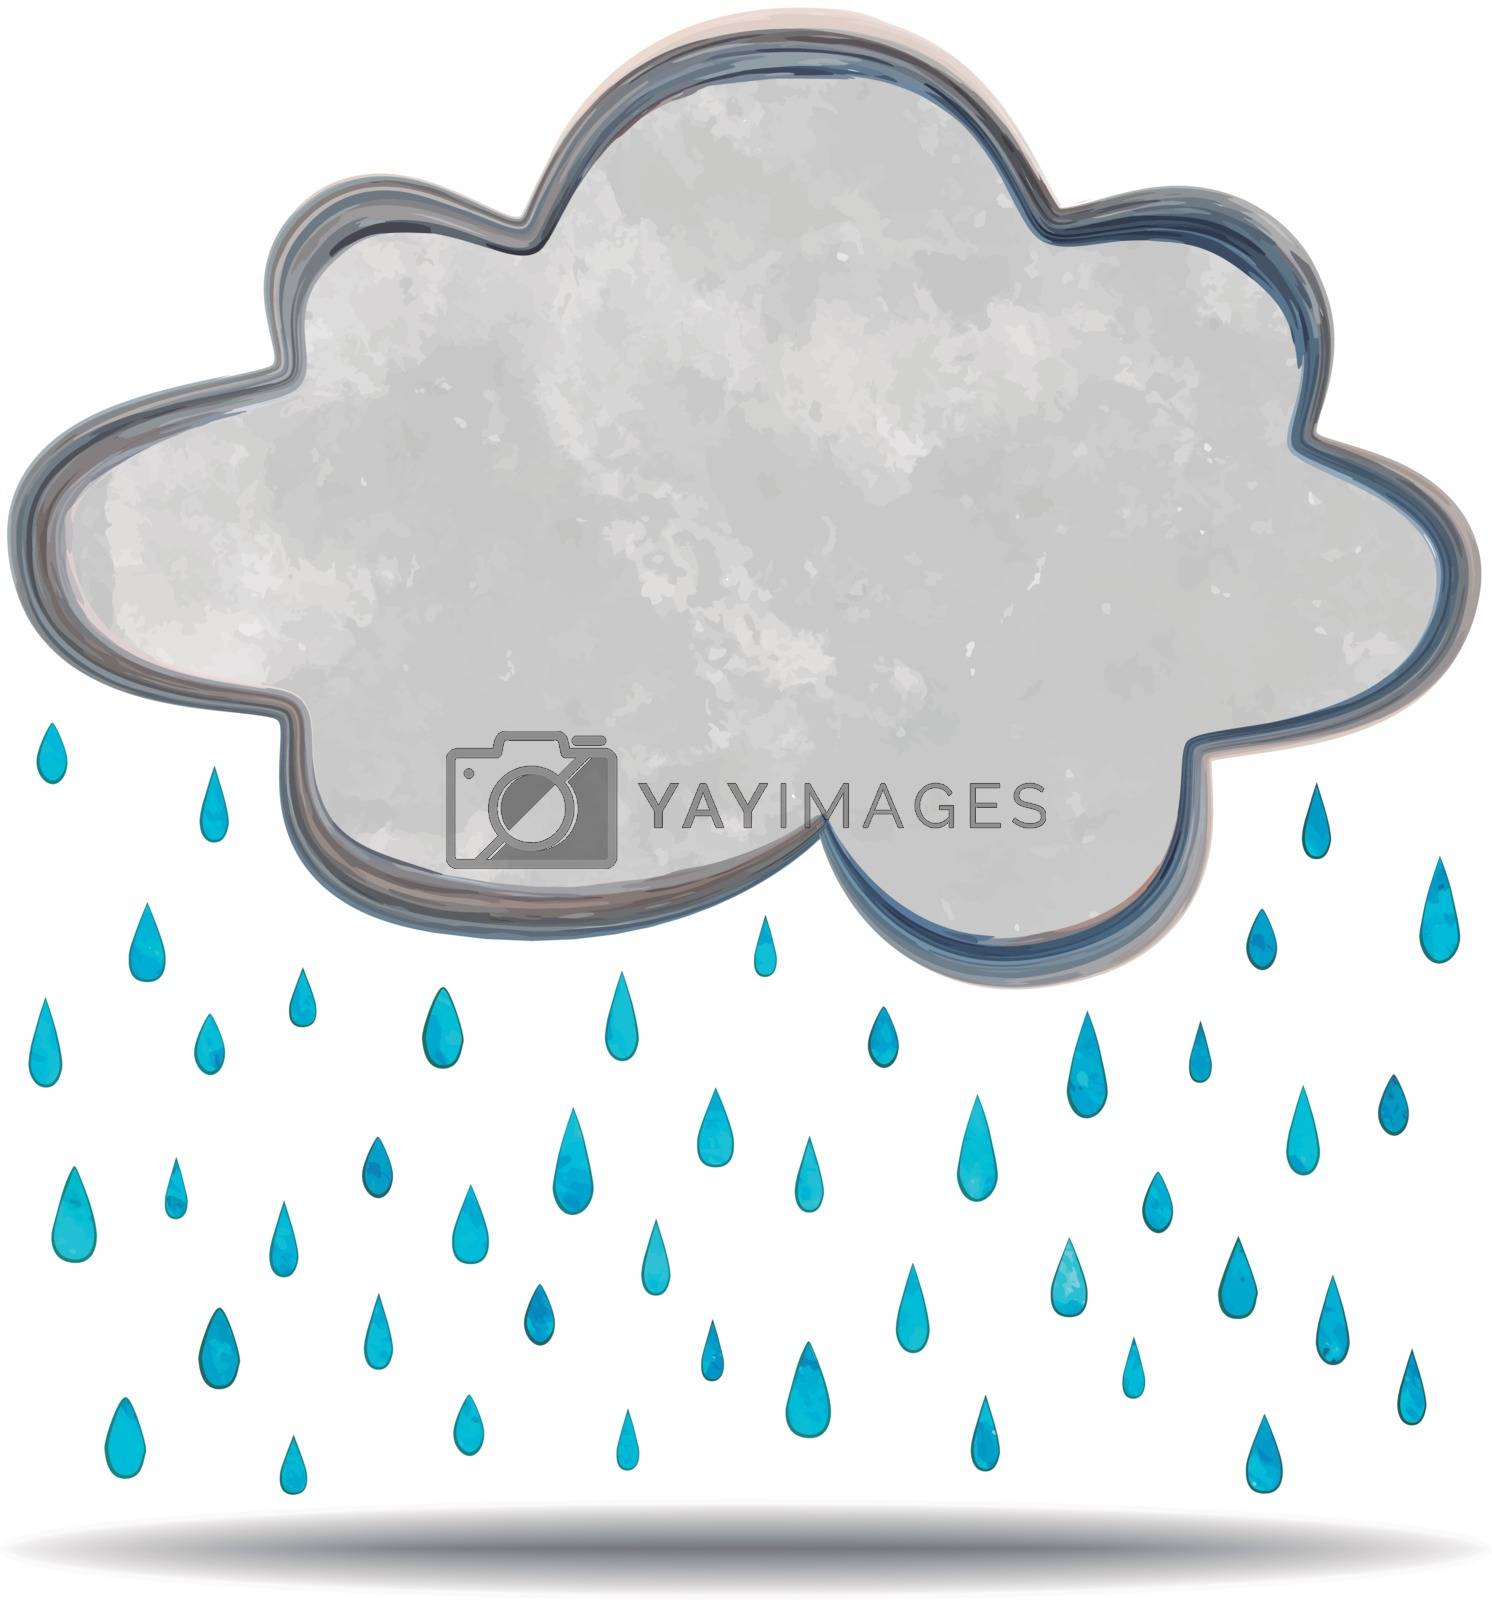 Royalty free image of climate. raining cloud by noche